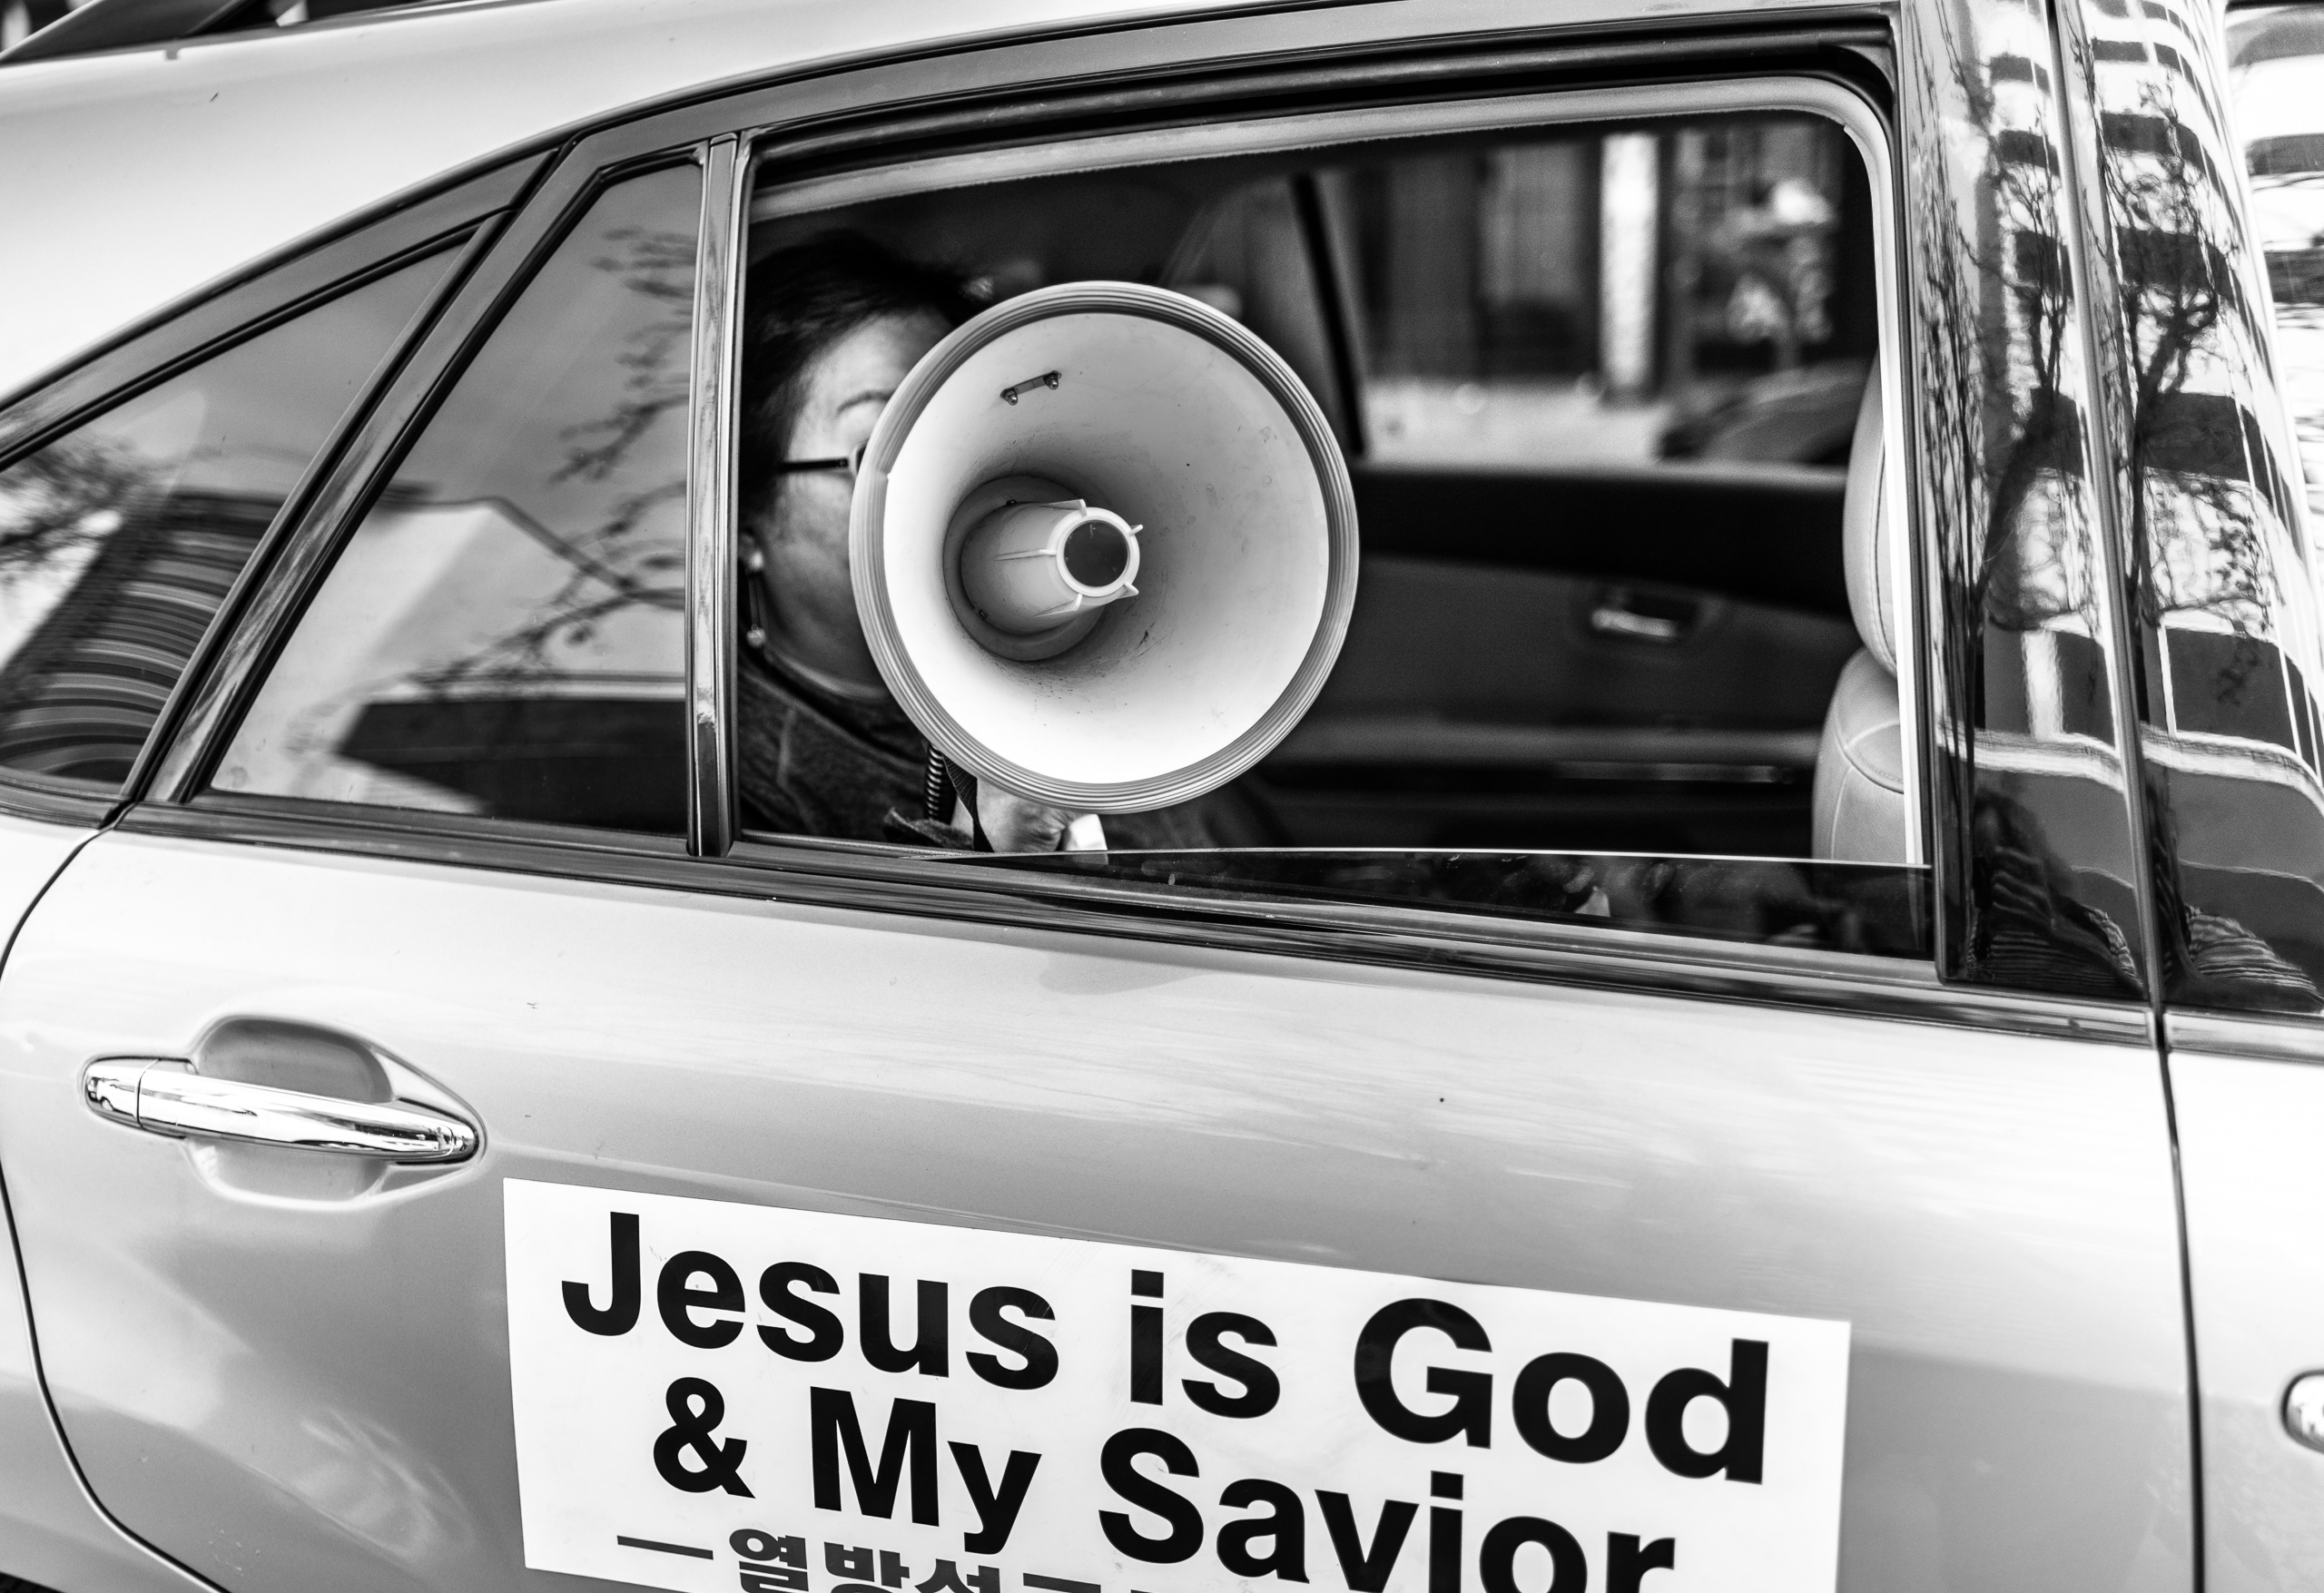 a car drives down a street in Little Tokyo in Los Angeles. A sign on the side of the car reads "Jesus is God & My Savior" in English, and then below that is Korean text, presumably also saying "Jesus is God & My Savior". The rear passenger window is rolled down and a woman holds a megaphone out the window. She speaks various proselytizing text as the car goes down the street. 